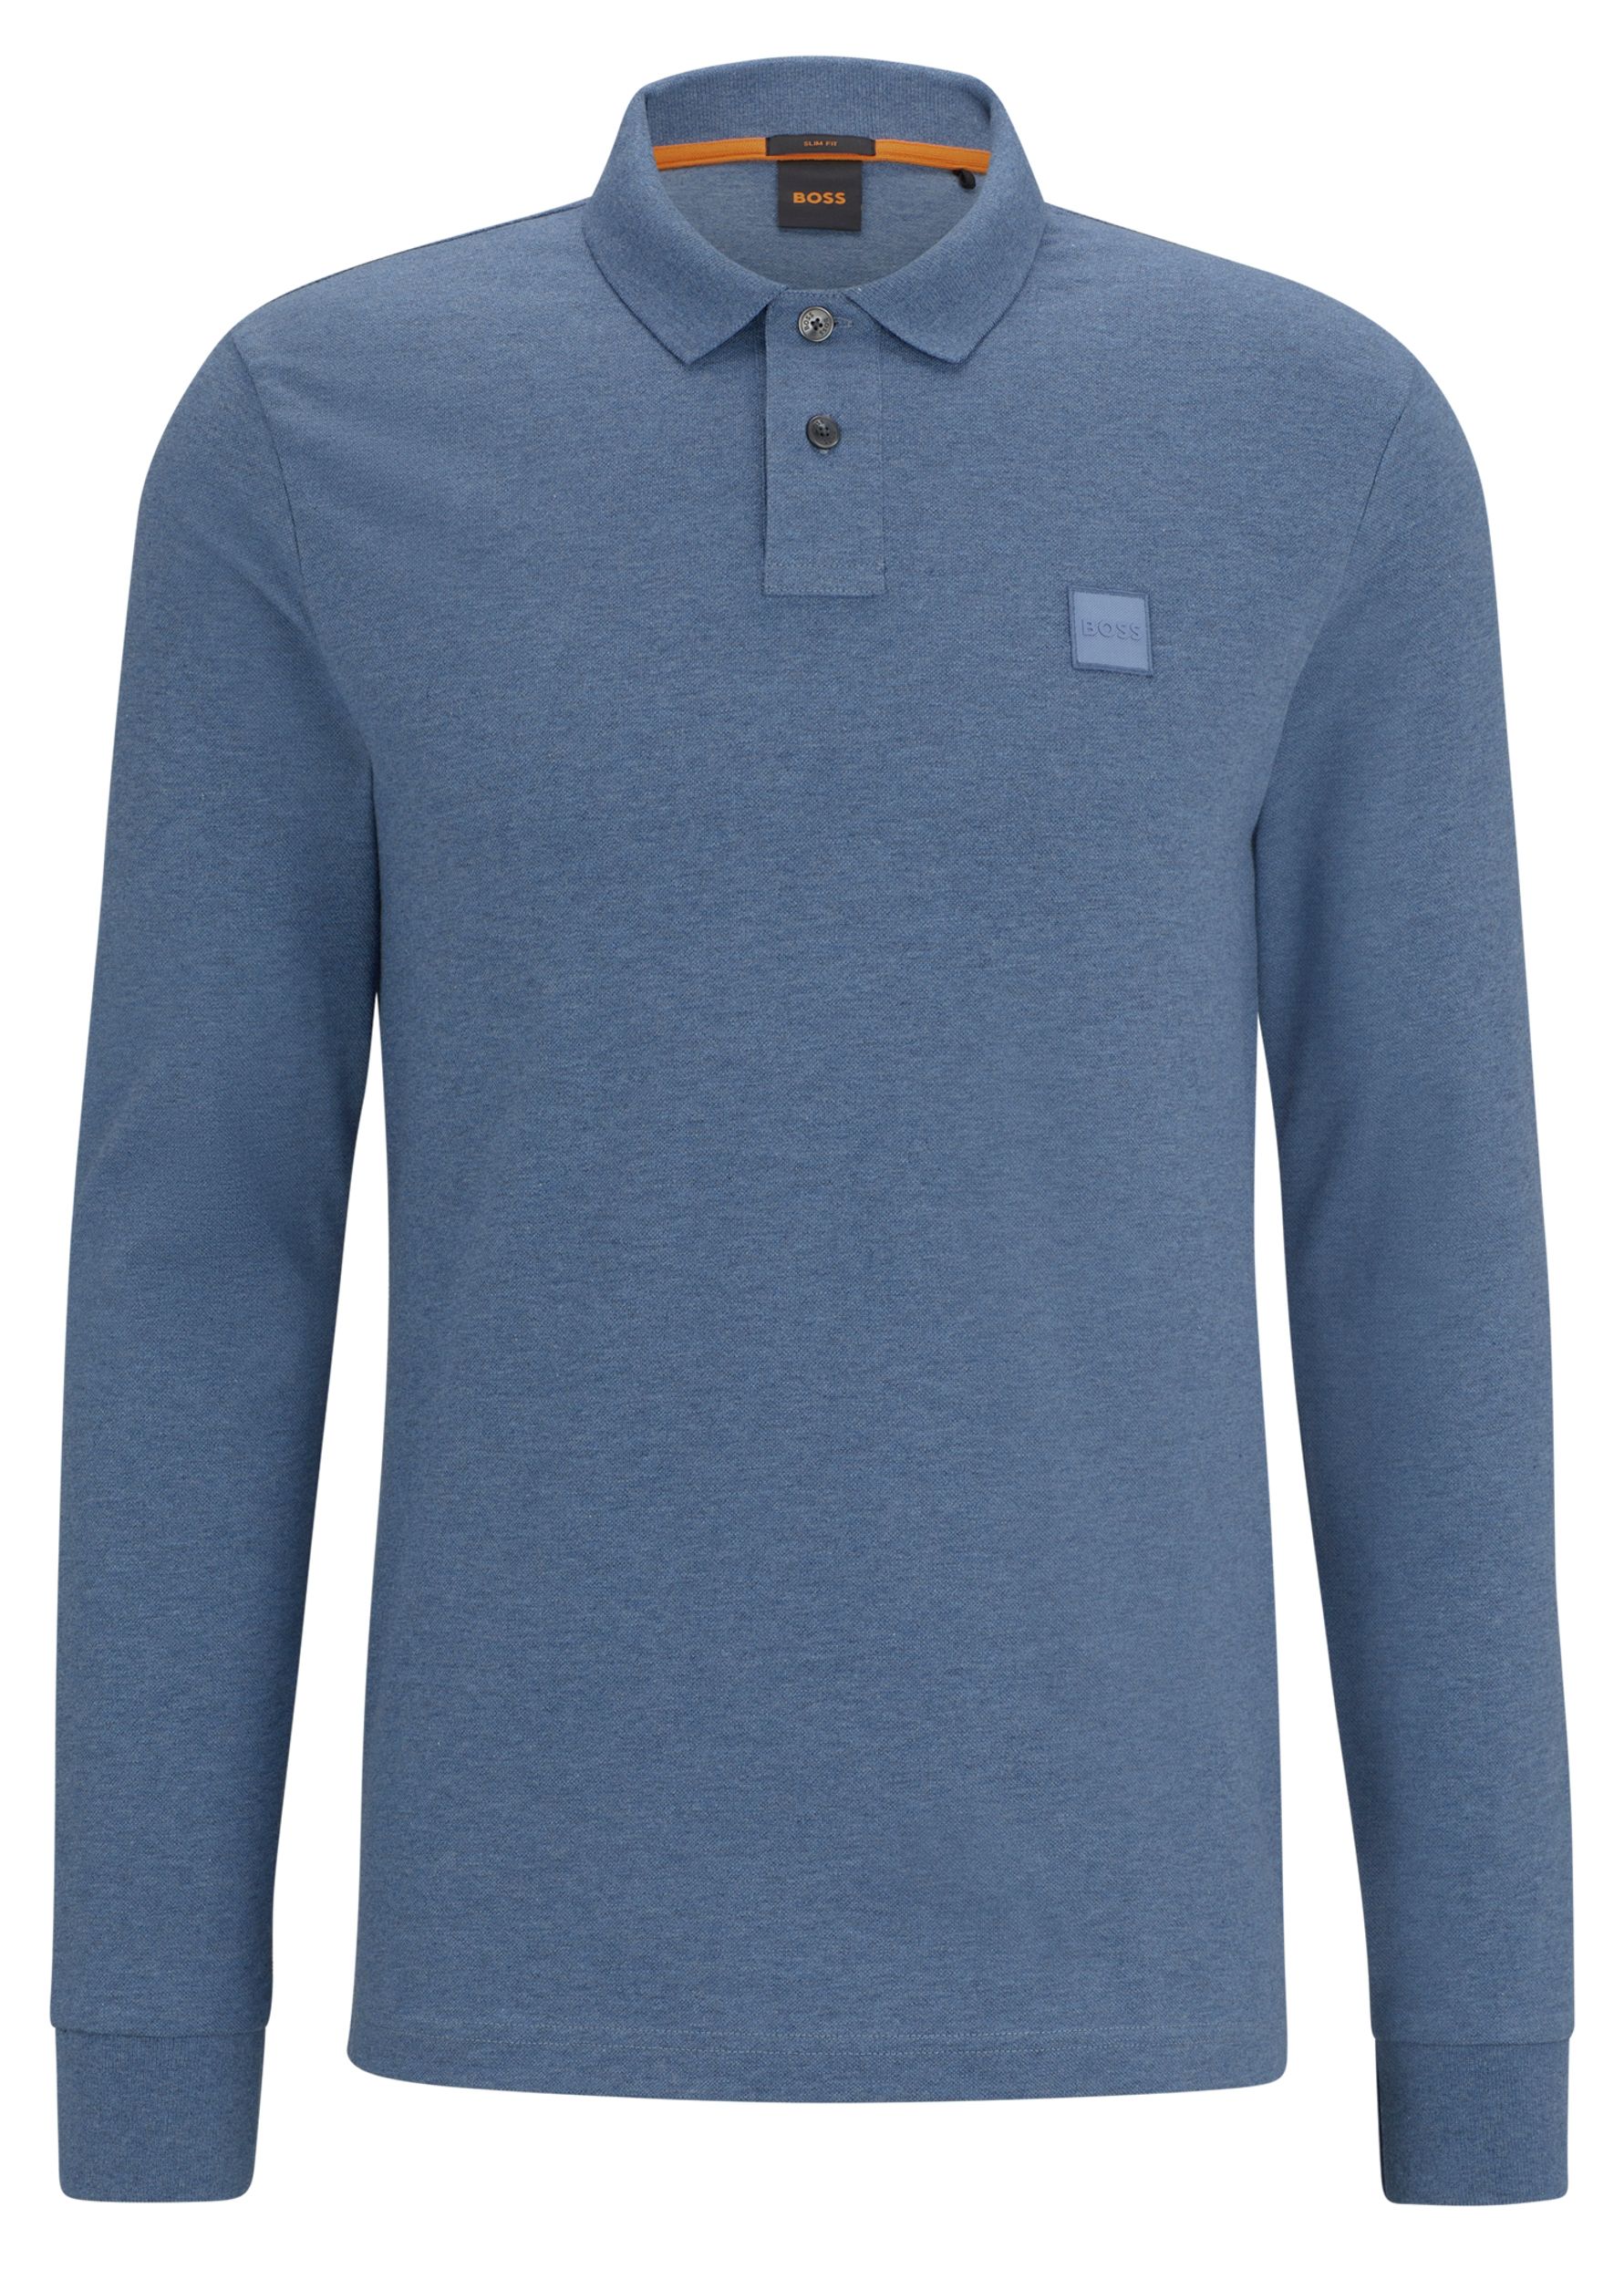 Boss Passerby Polo LM Blauw 092736-001-L